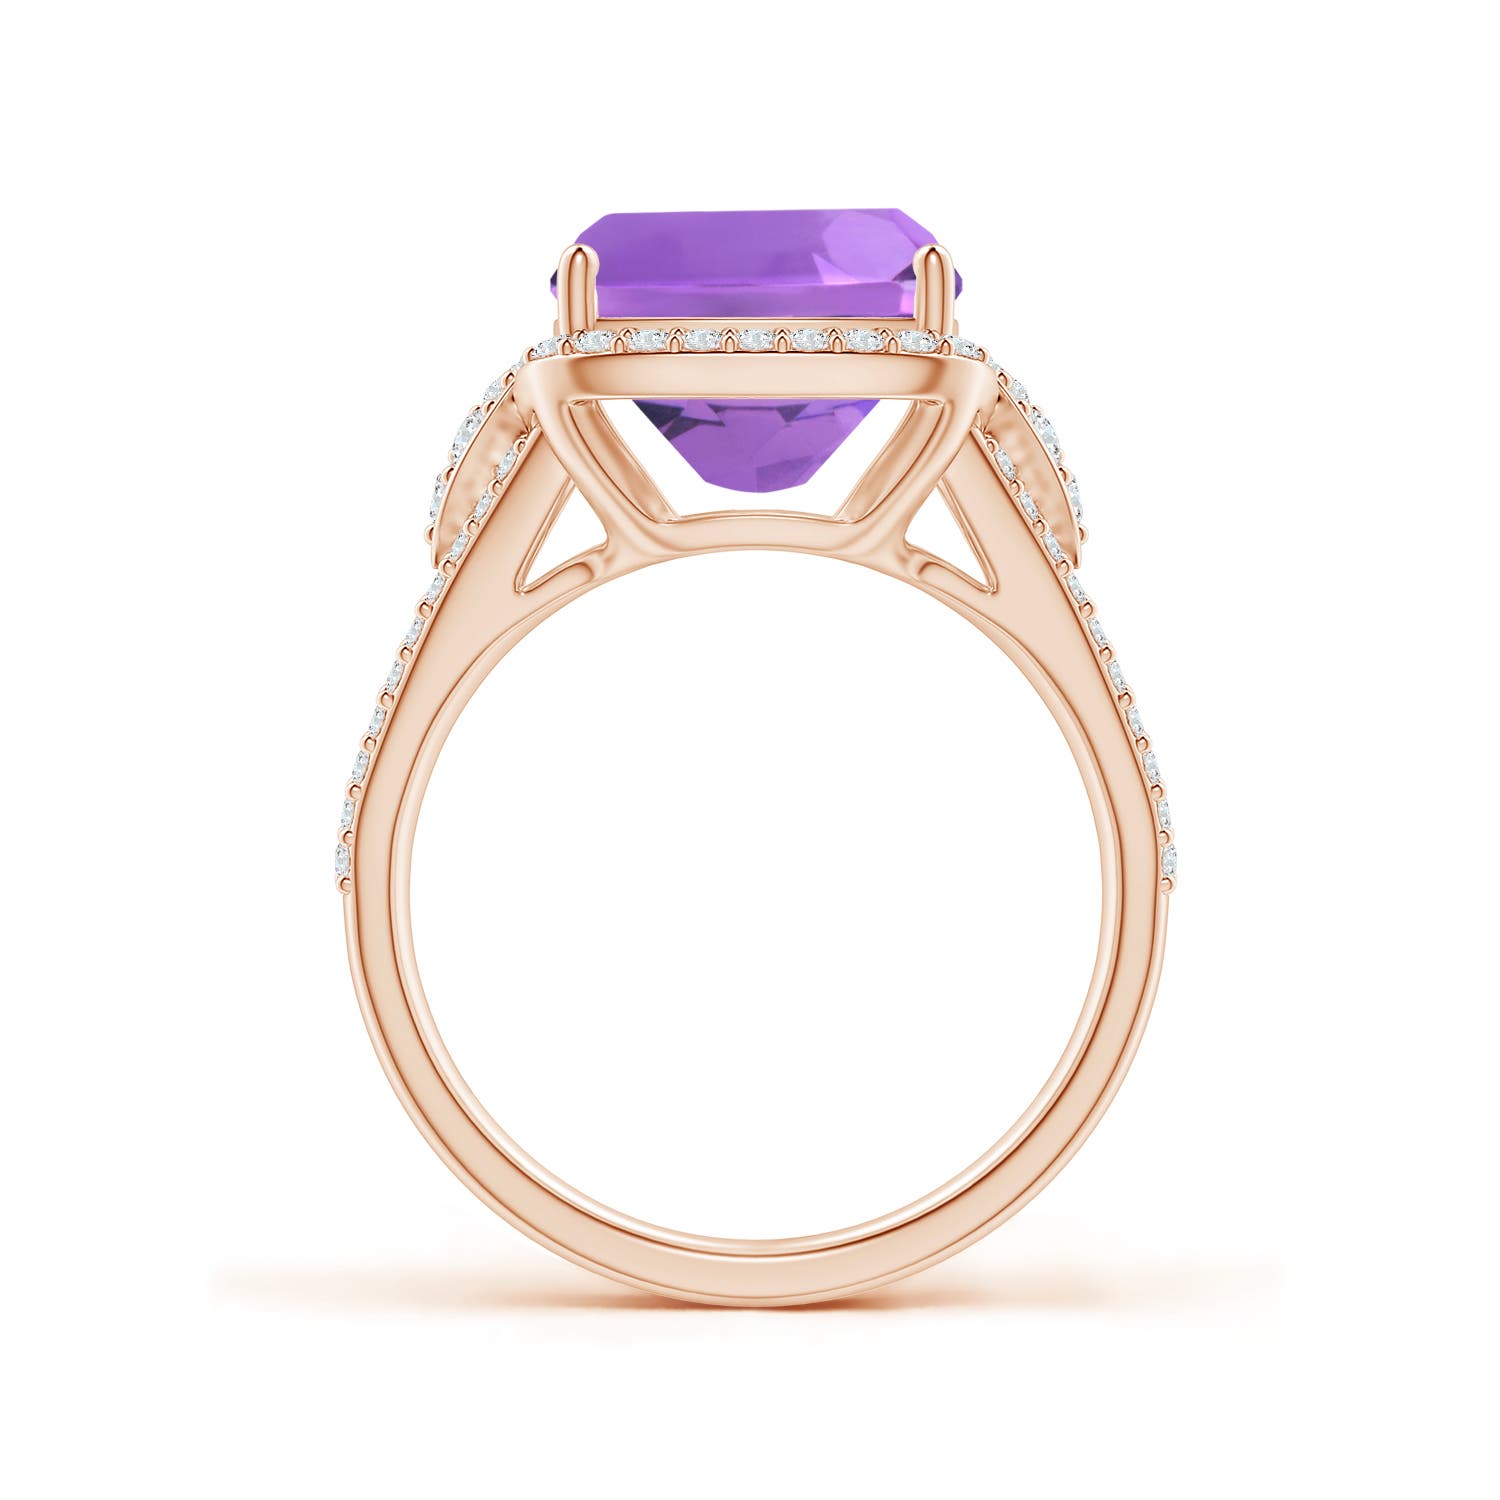 AA - Amethyst / 5.06 CT / 14 KT Rose Gold